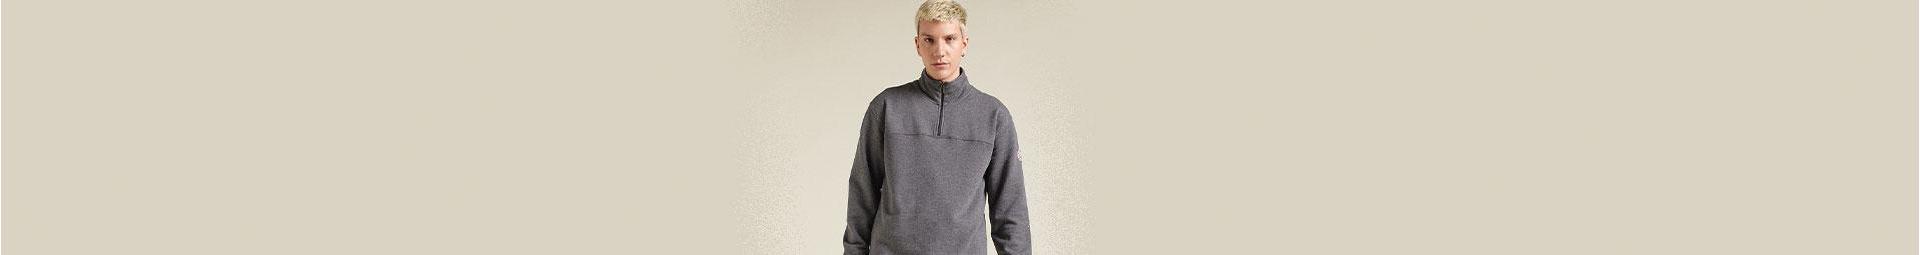 Pullovers for men & sweaters | Pyrenex